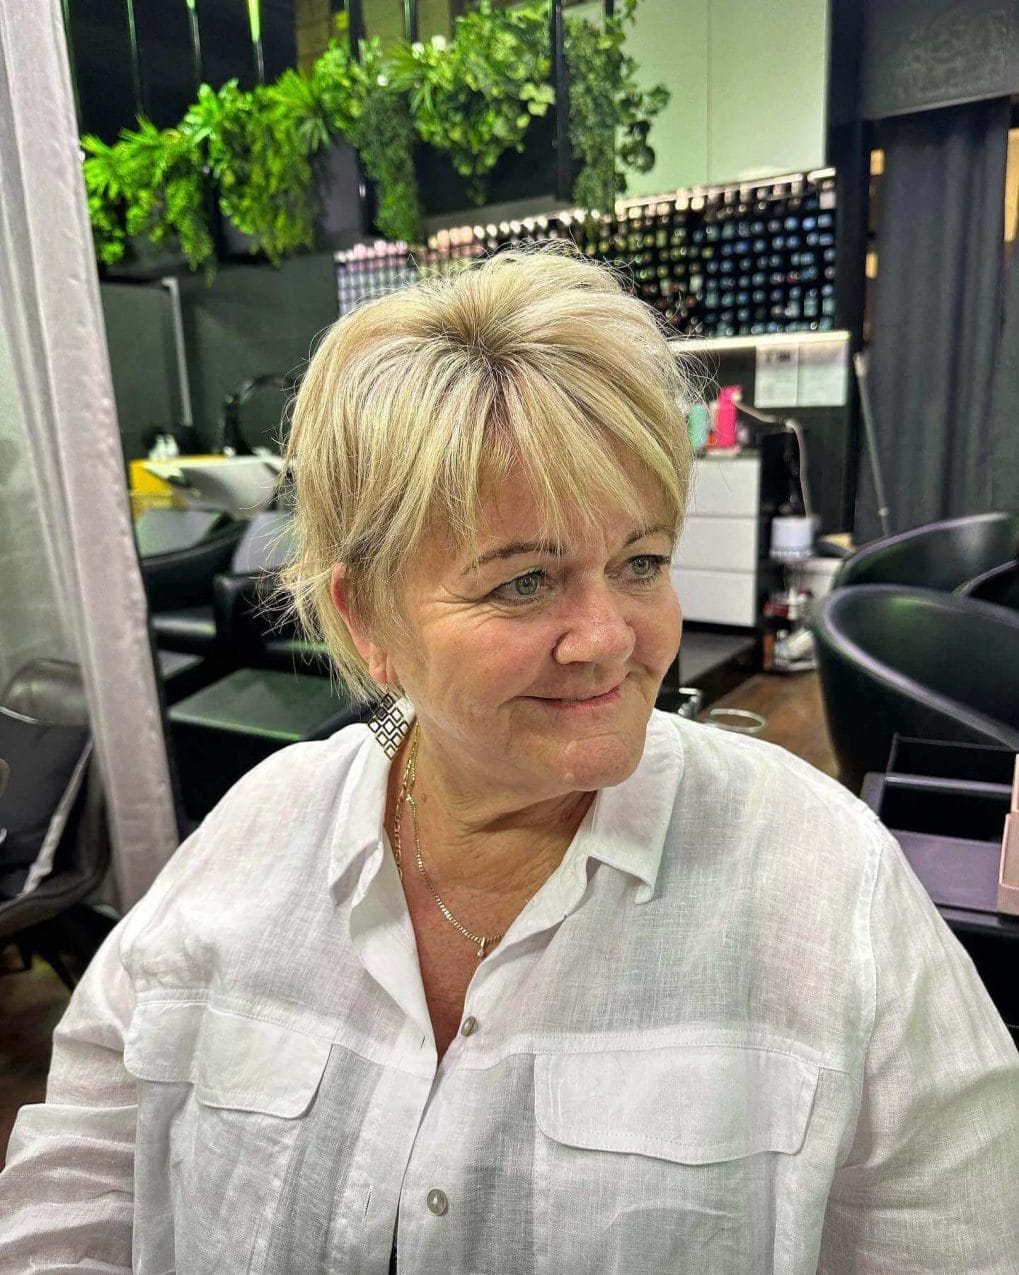 Short layered haircut with volume, light blonde color, and straight, see-through bangs.